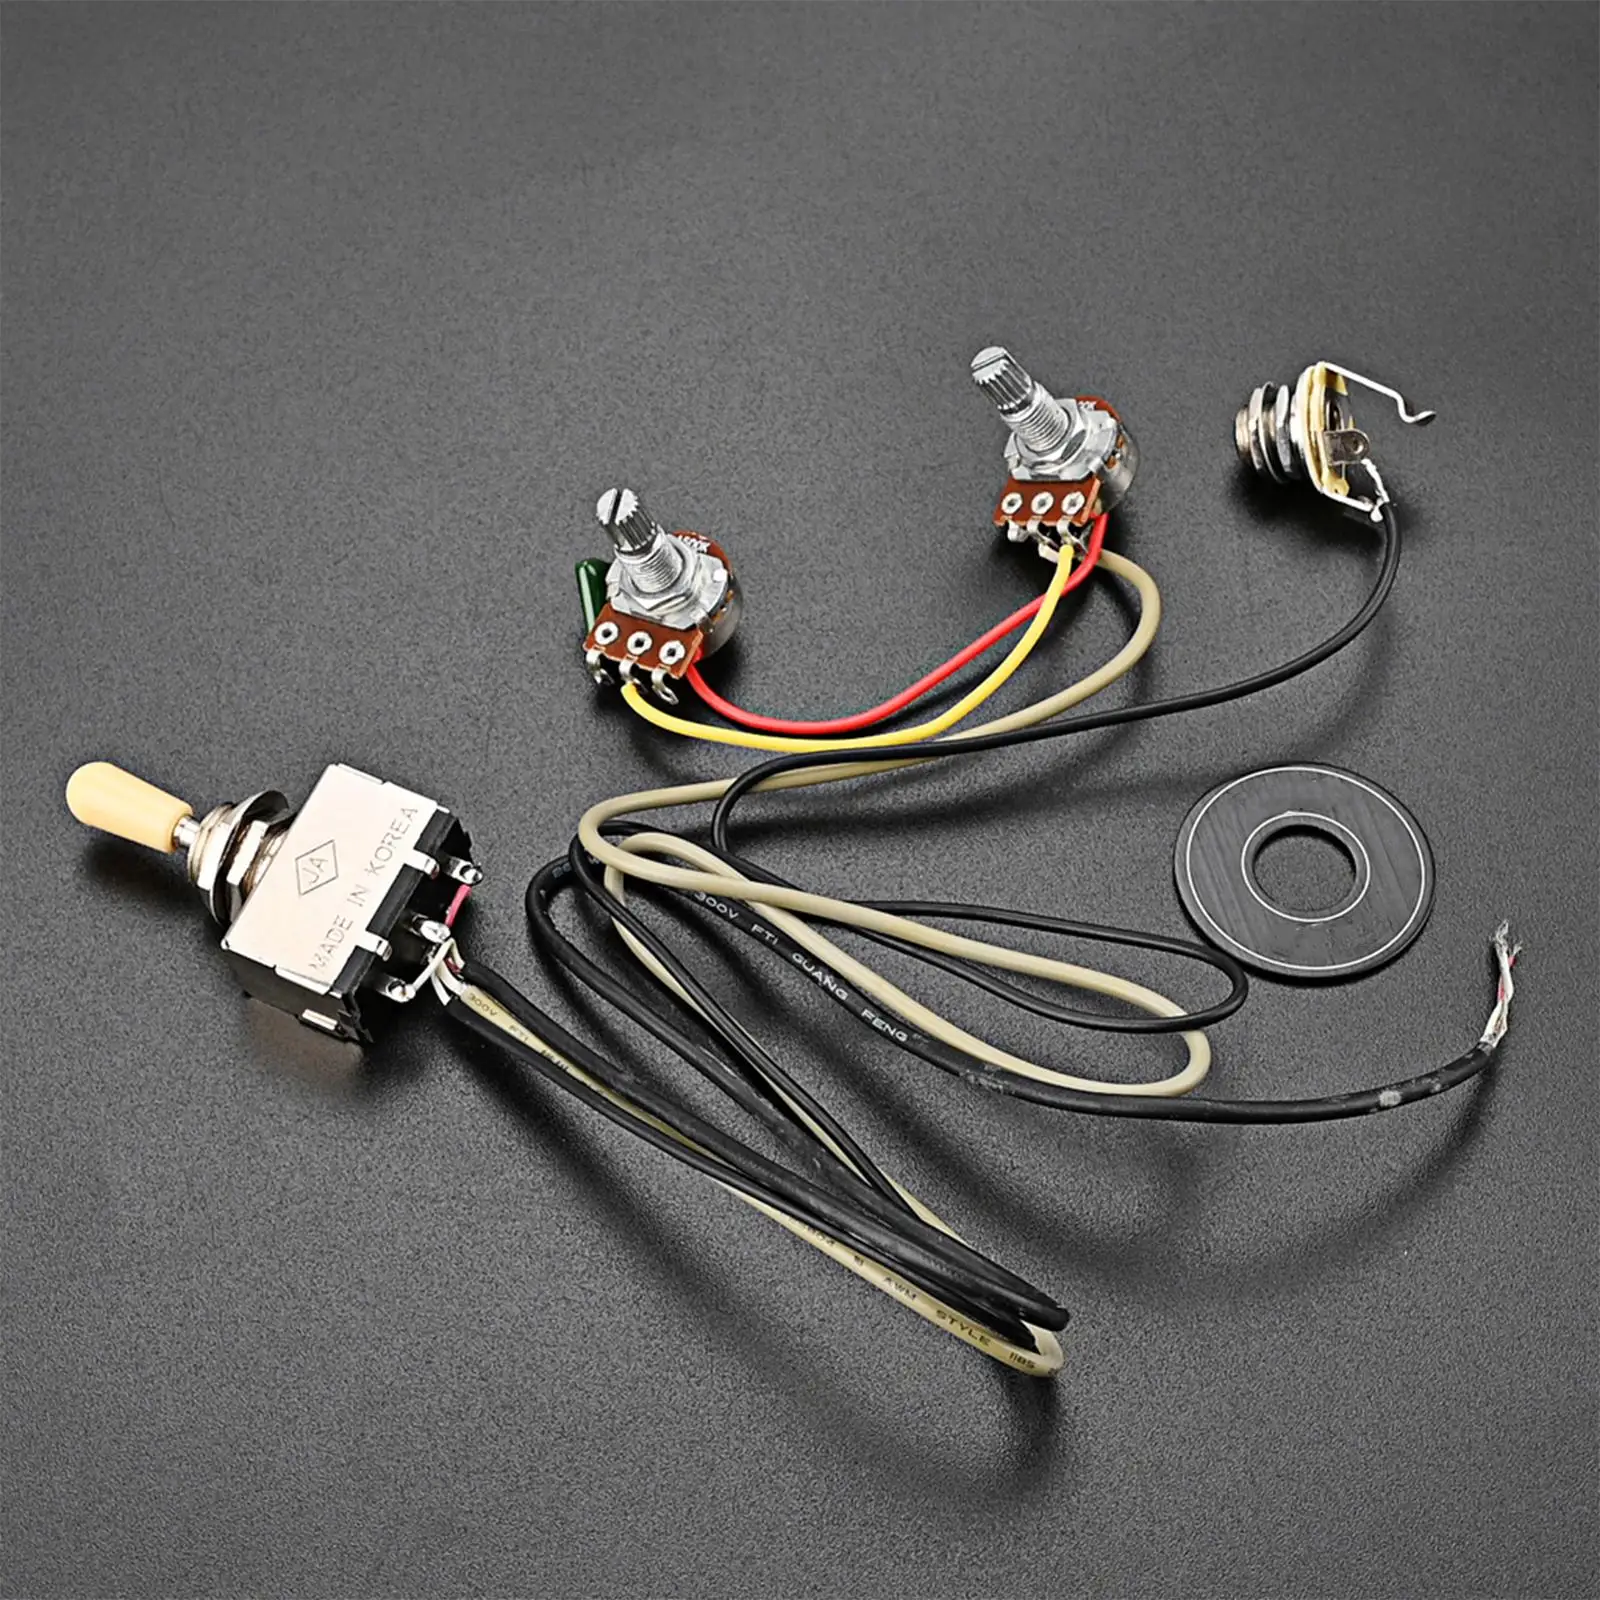 Guitar Wiring Harness Sturdy Simple to Install Audio Volume for Supplies